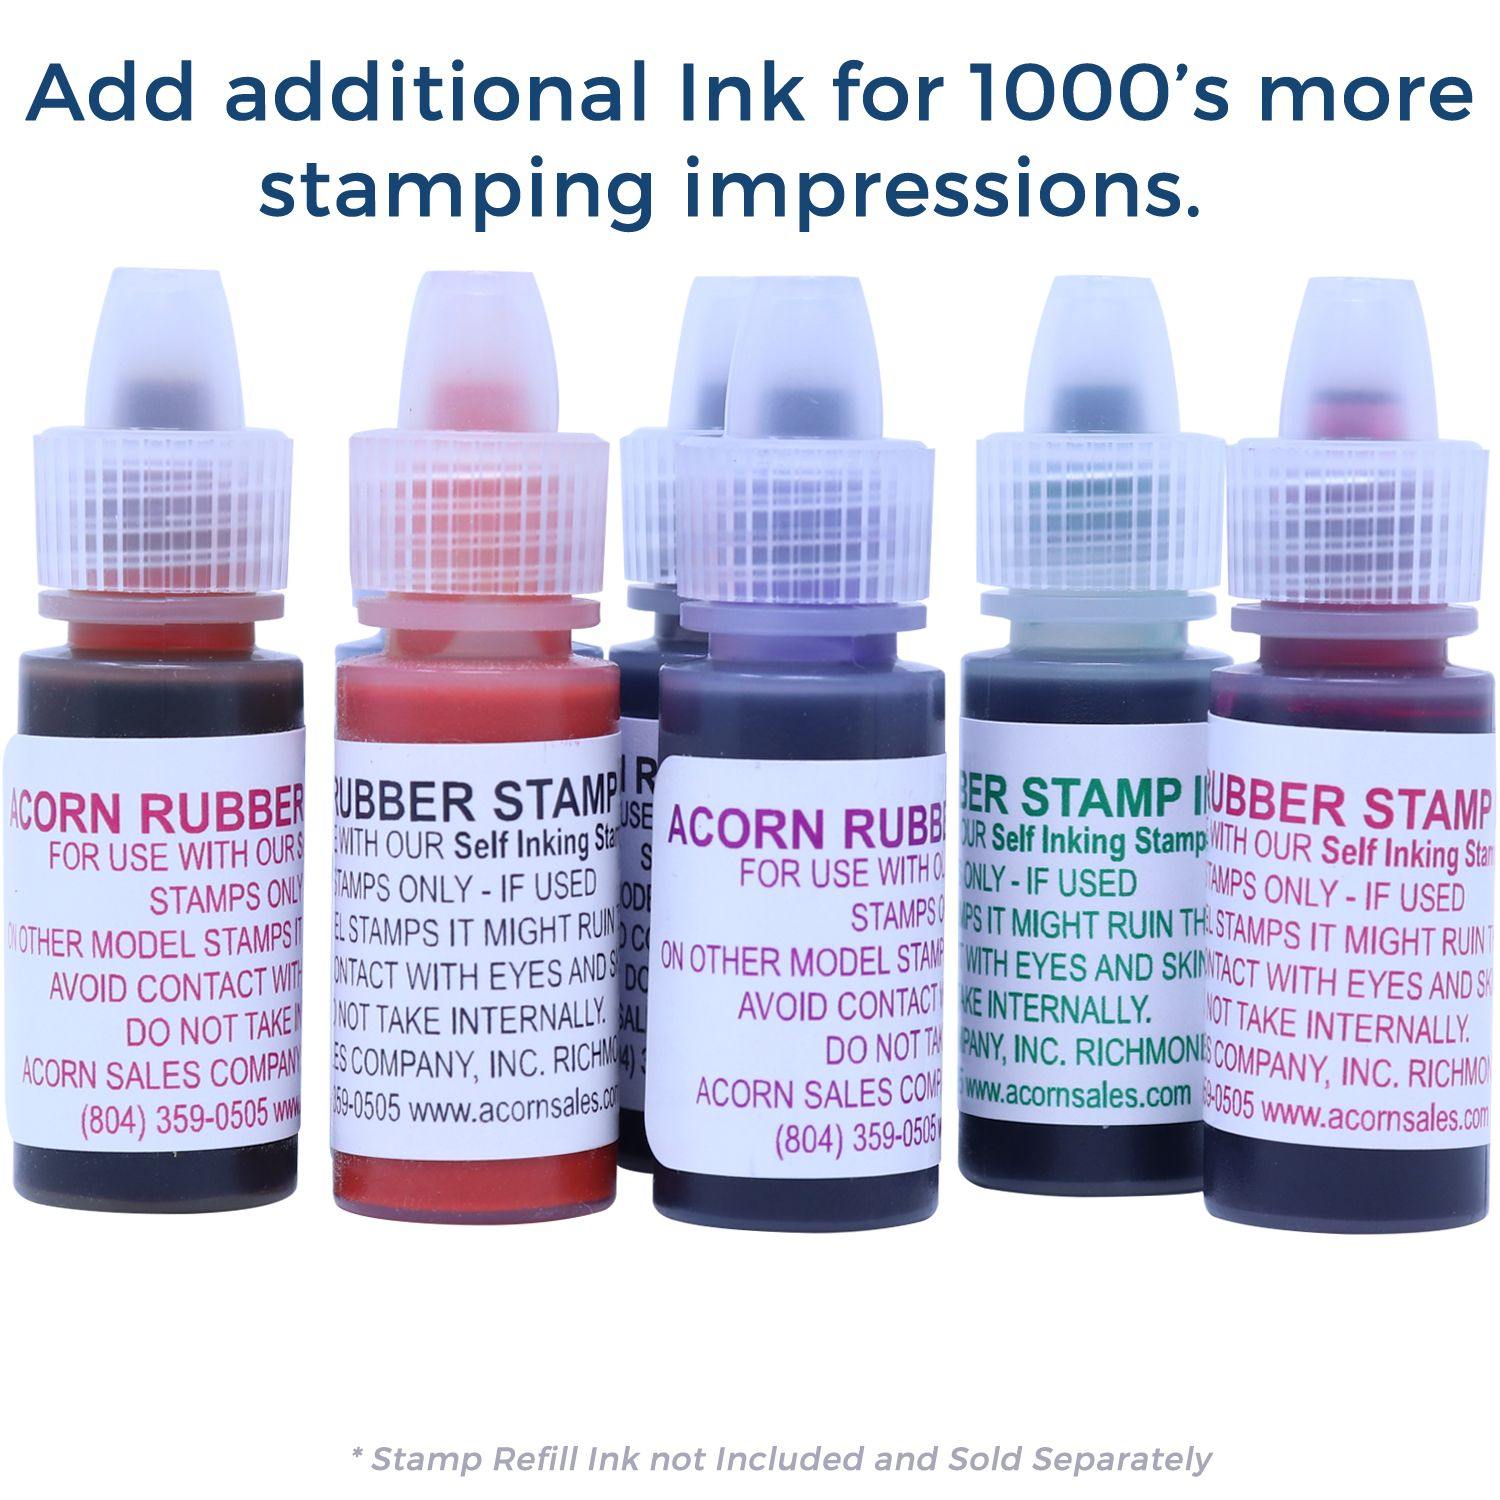 Refill Inks for Large Pre-Inked Archivar Stamp Available